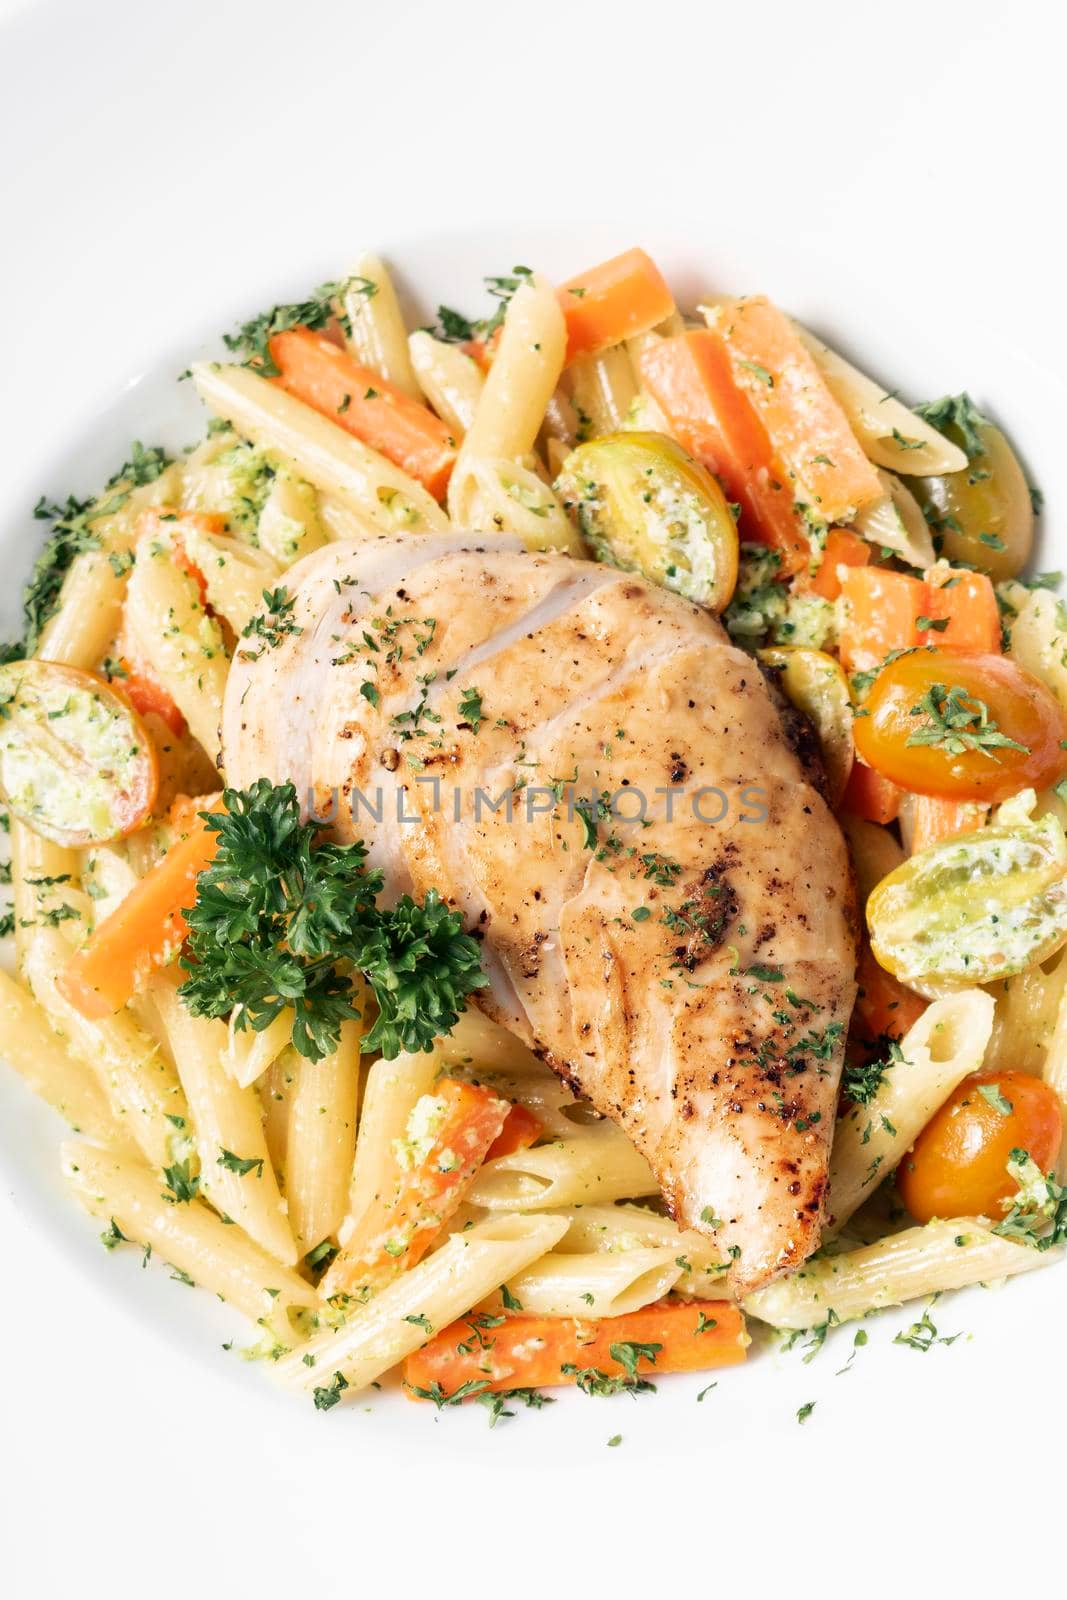 fried chicken breast with penne and saute vegetables pasta dish by jackmalipan